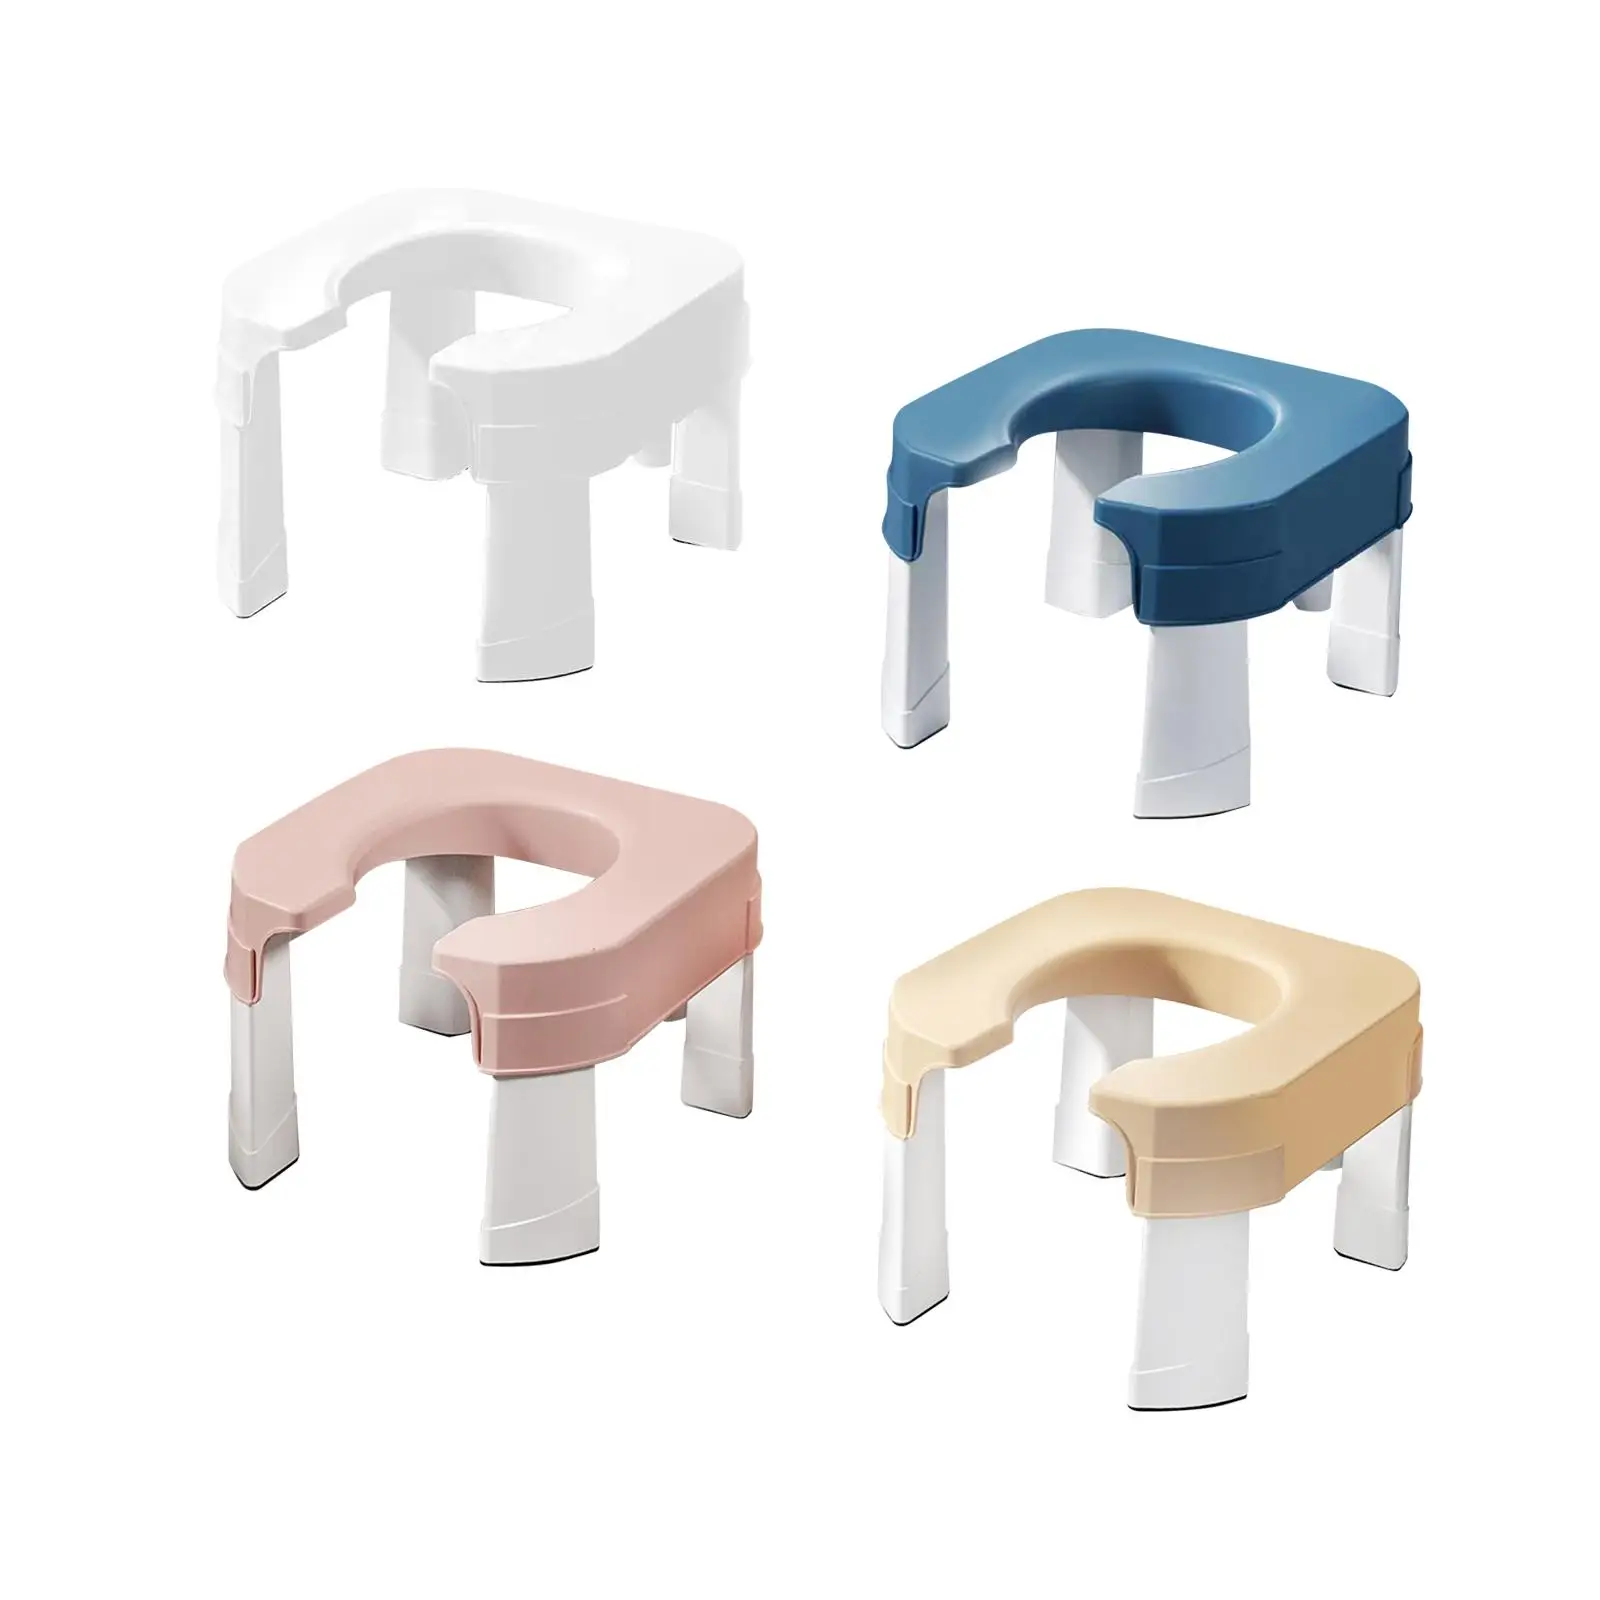 Squat Potty Multifunctional Assistance Compact Bathroom Squating Stool Stool Footrest for Bathroom Toilets Potty